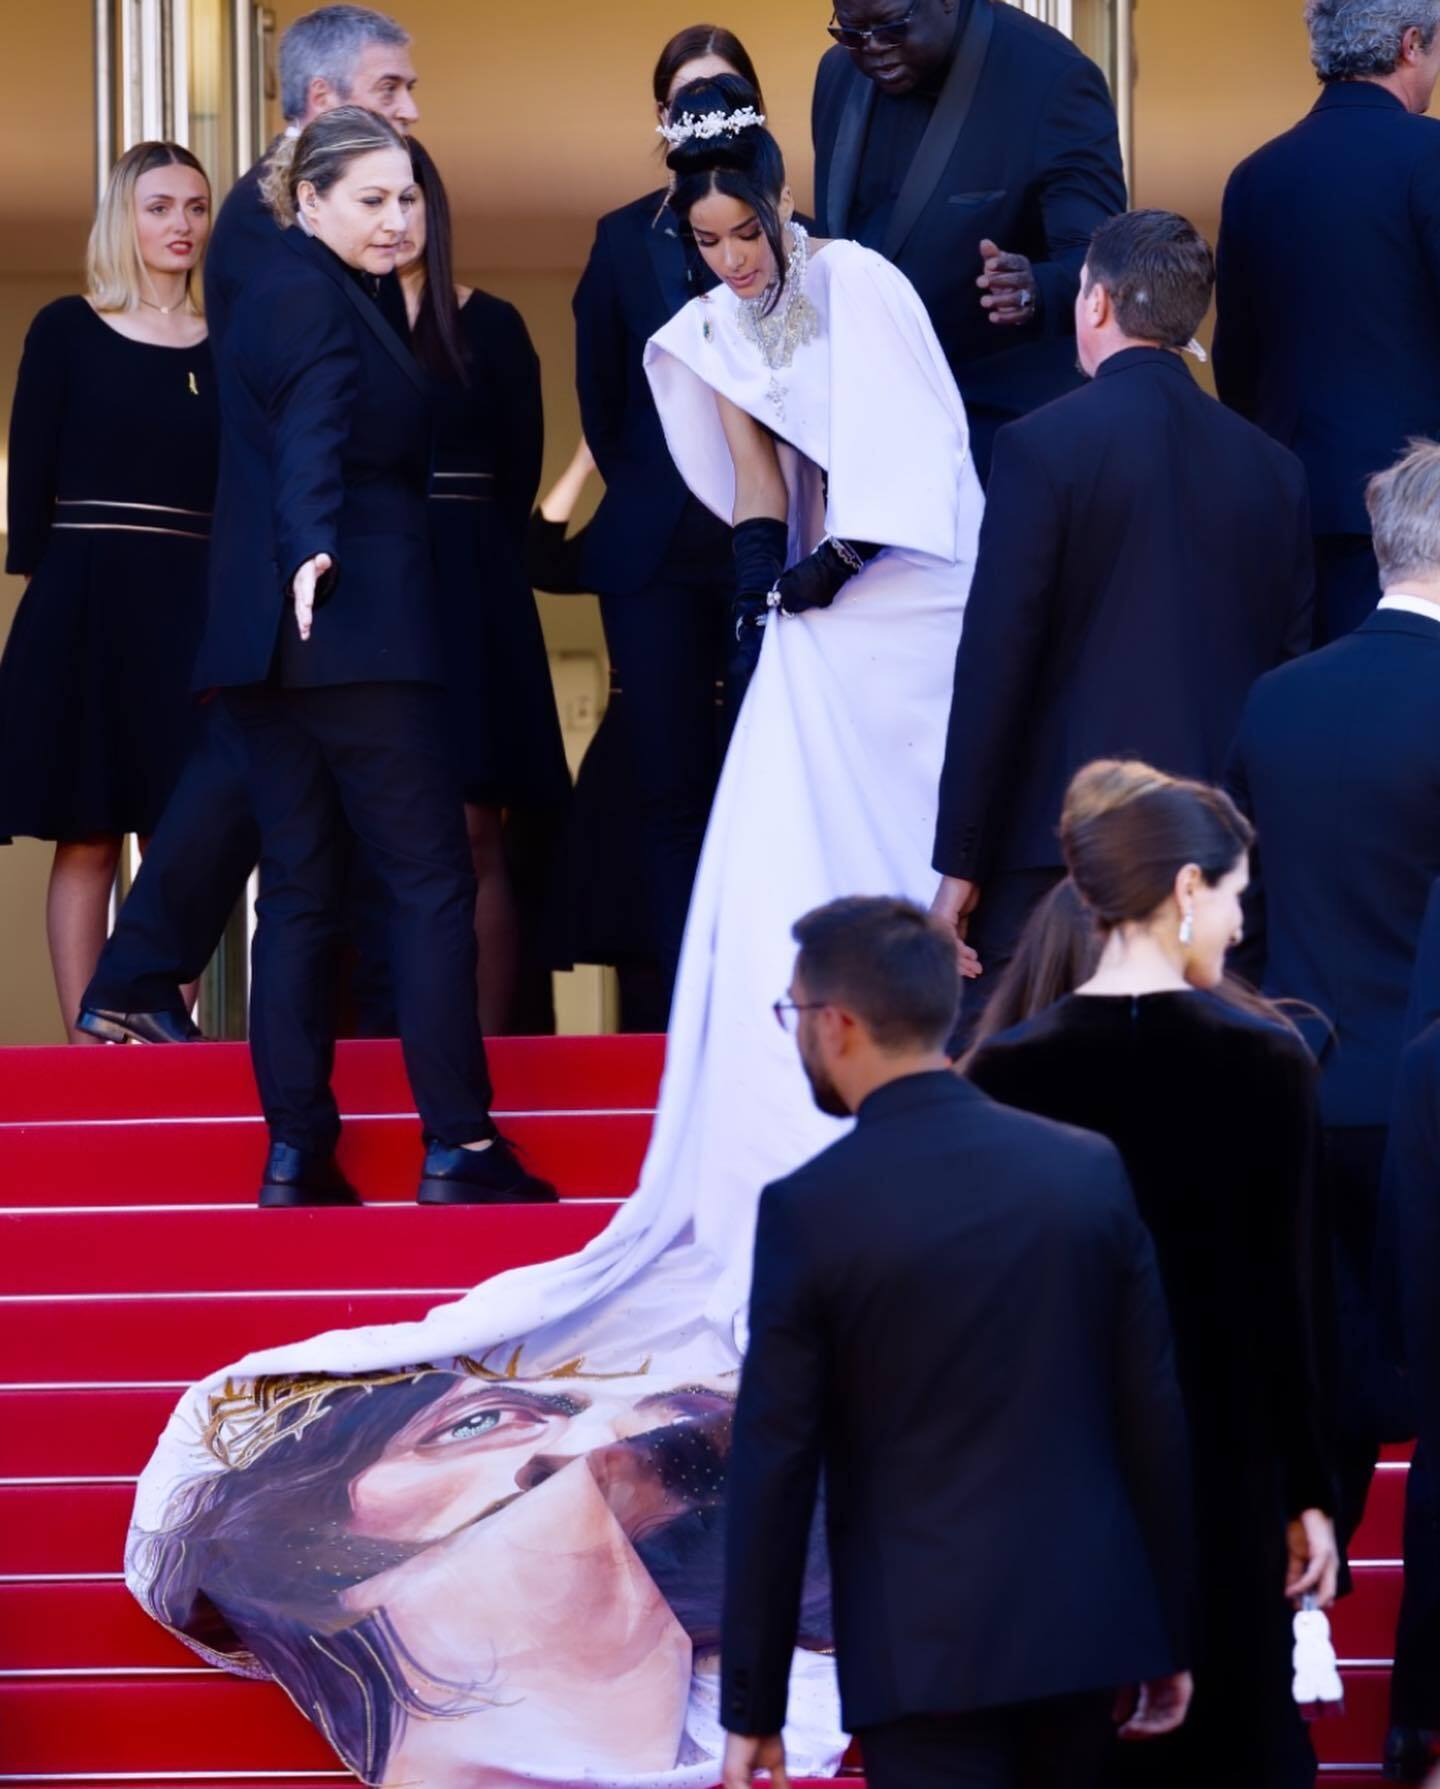 A scandal erupted on the red carpet in Cannes over a dress with the image of Jesus Christ. Photo